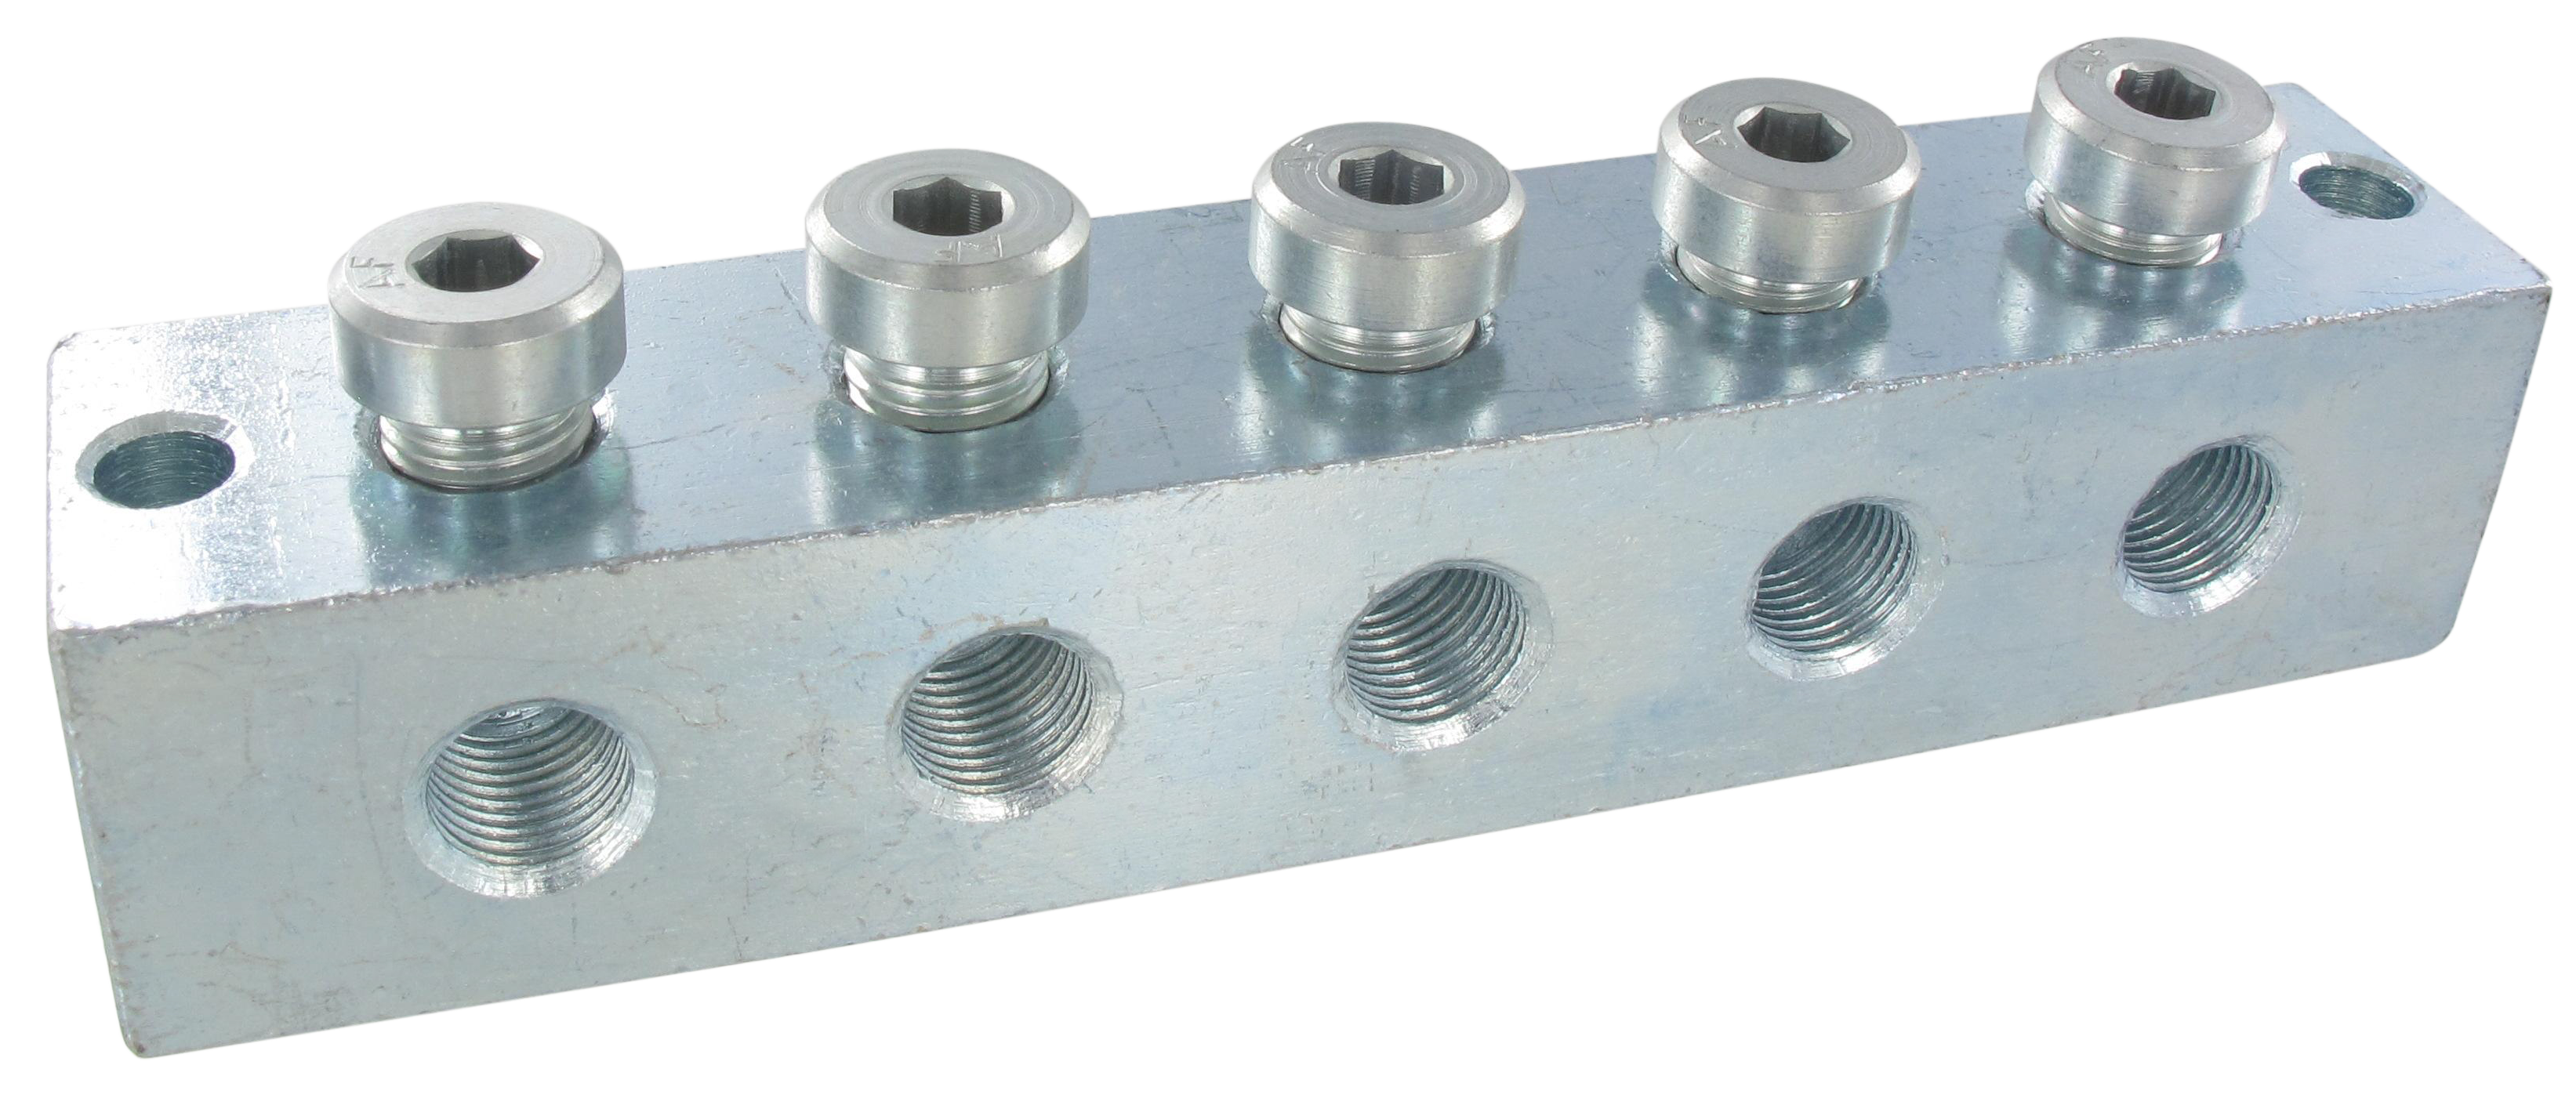 Threaded T-connector manifold M10x1 with 4 connections in galvanised steel Standard fittings for lubrication